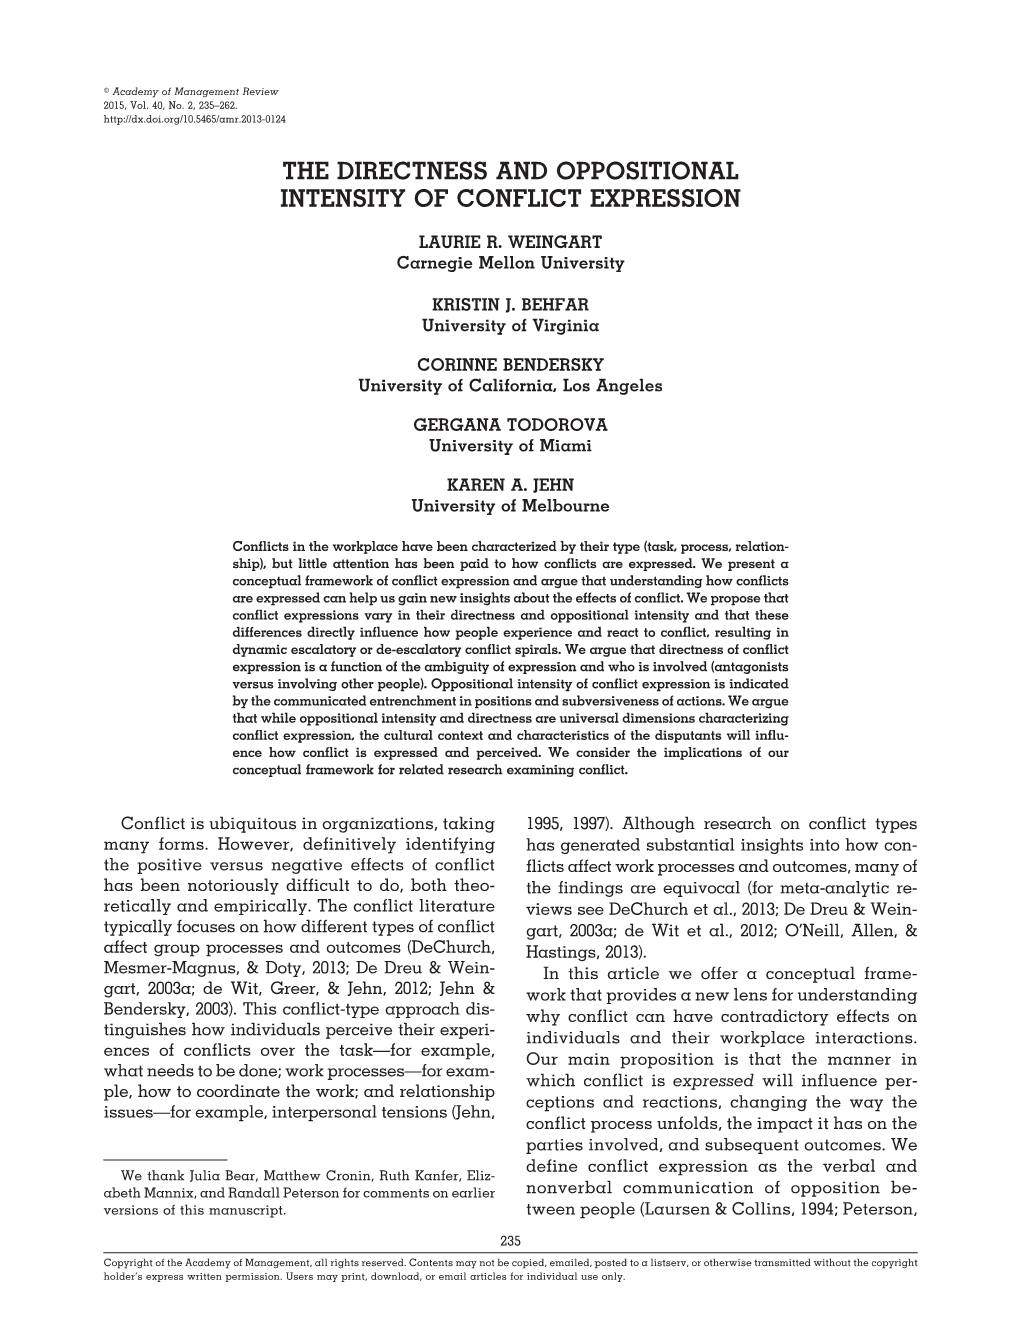 The Directness and Oppositional Intensity of Conflict Expression